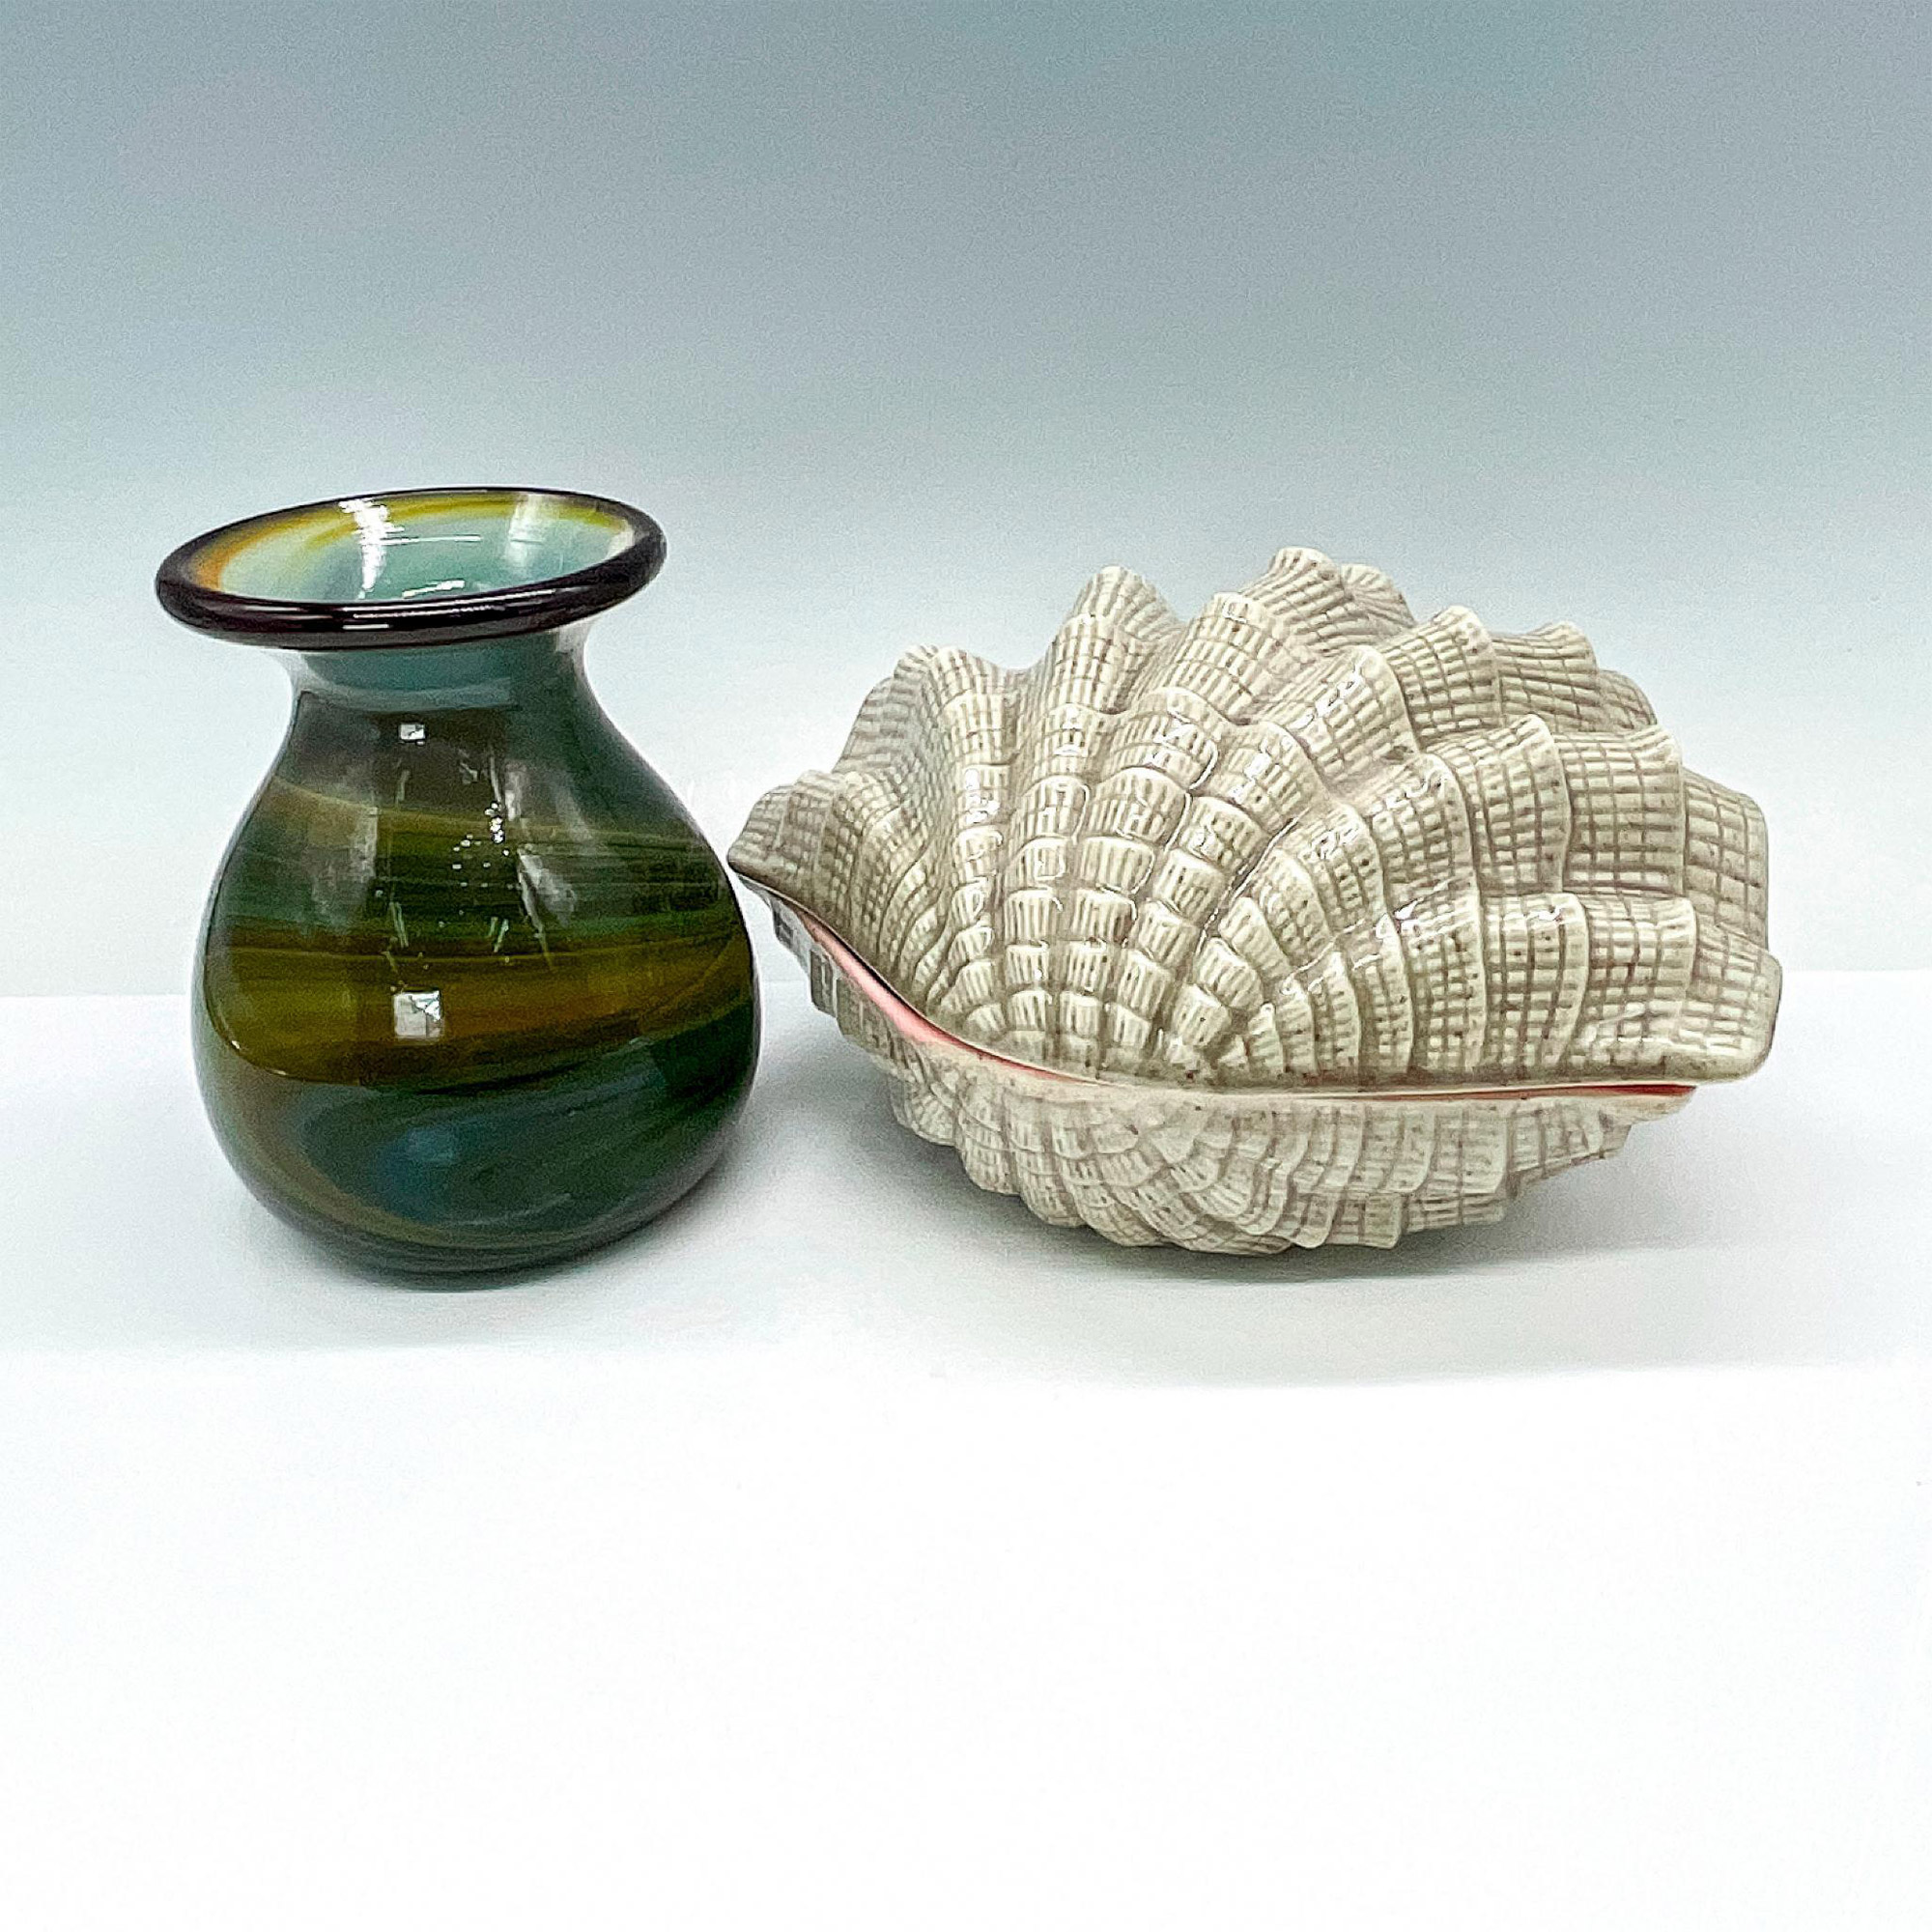 2pc Art Glass Vase and Handcrafted Ceramic Lidded Clam Dish - Image 2 of 3